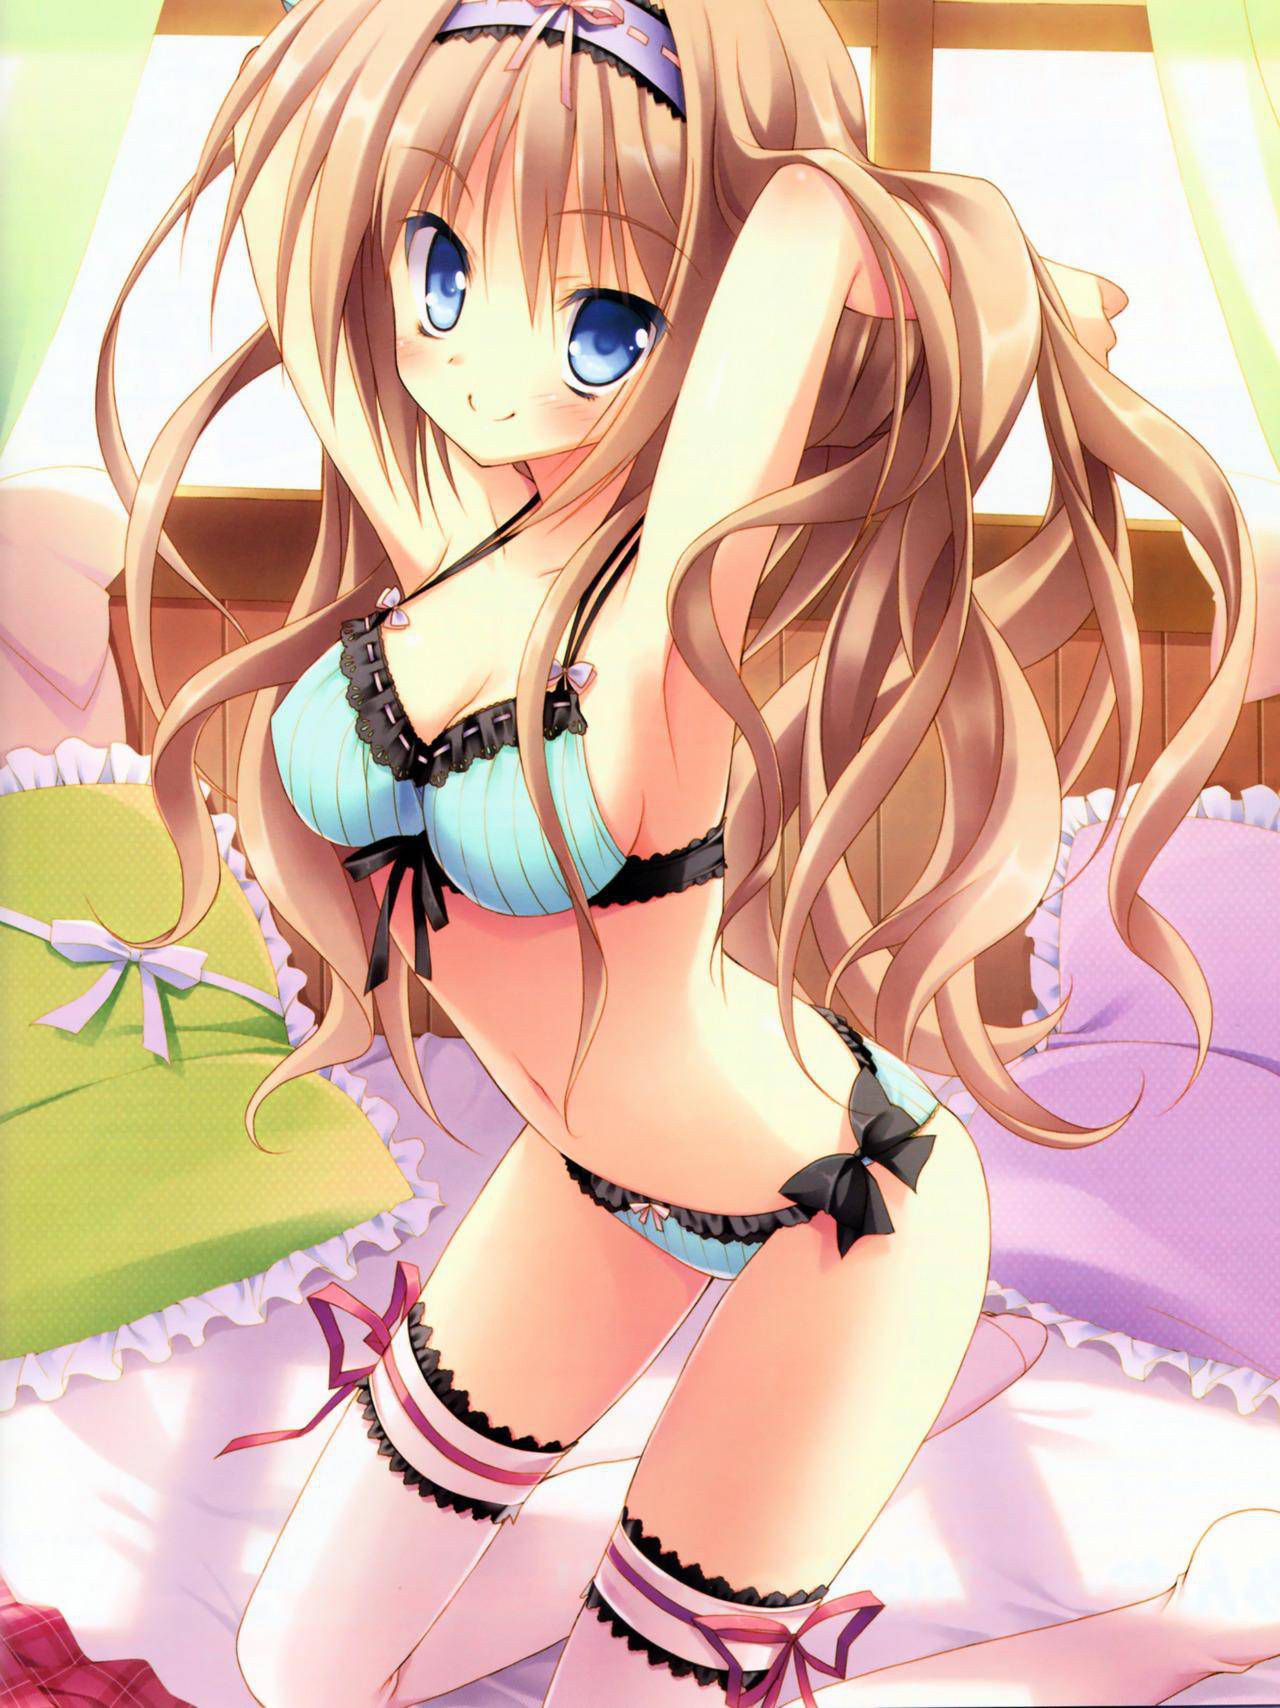 Naughty secondary image of a defenseless girl in underwear wwww 8